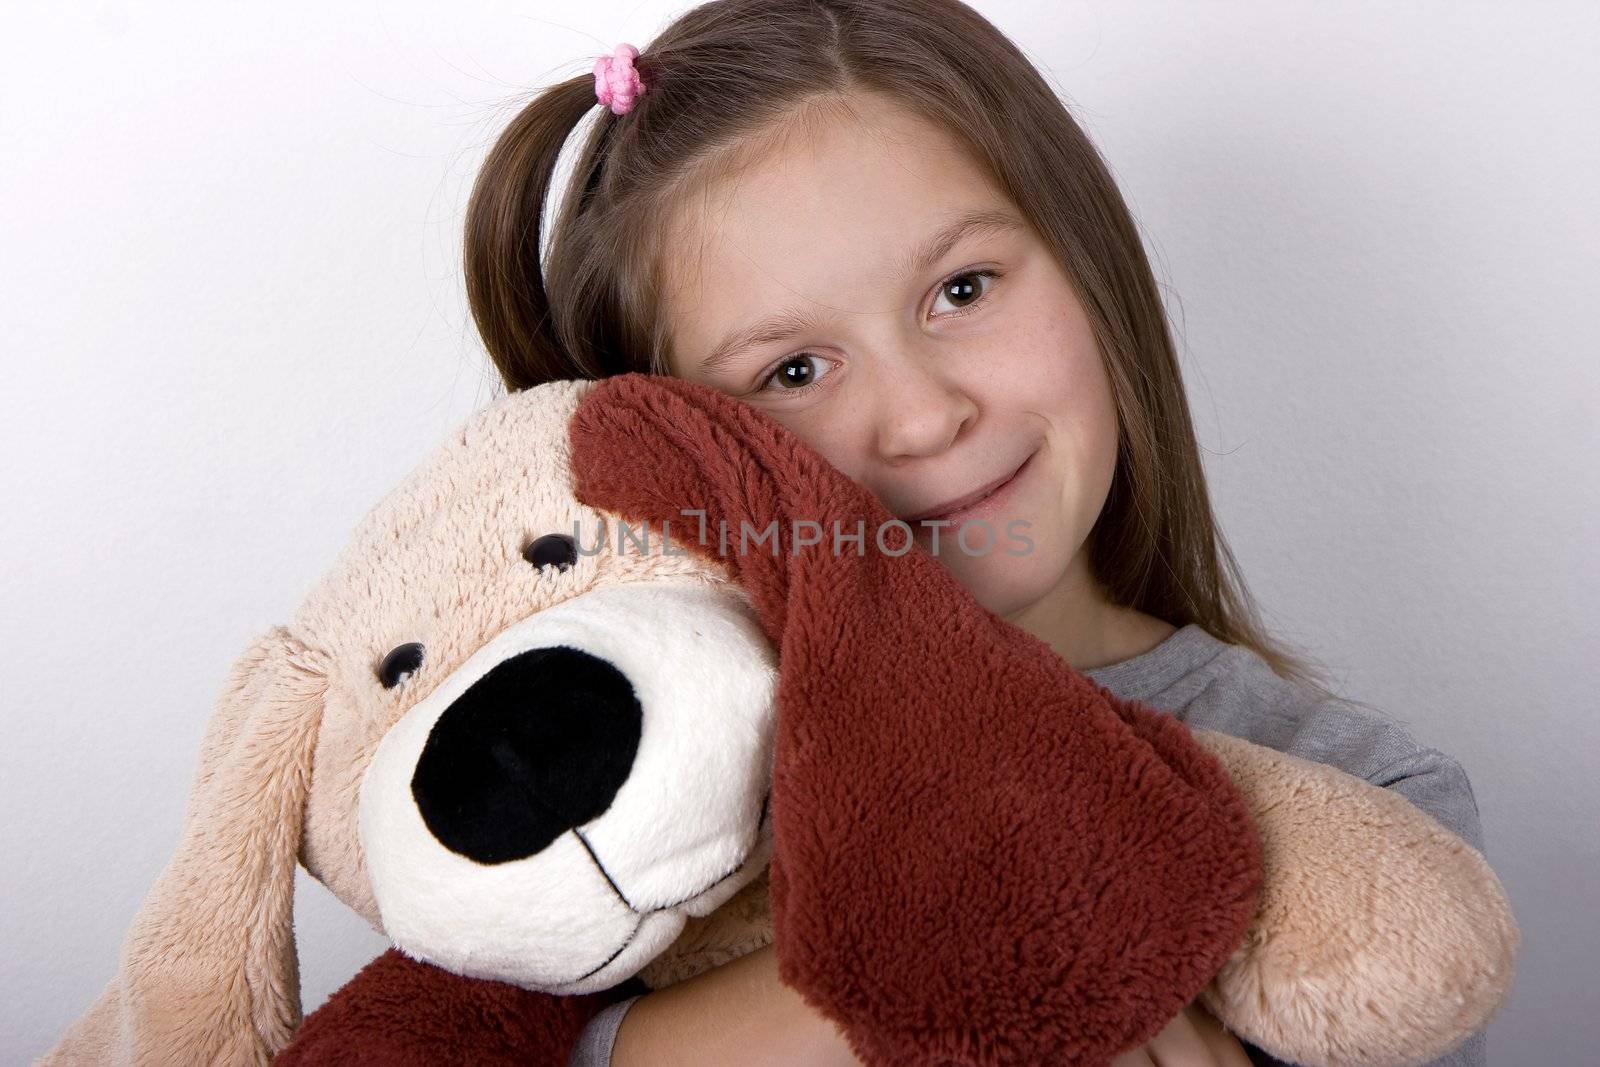 The happy girl embraces a toy dog